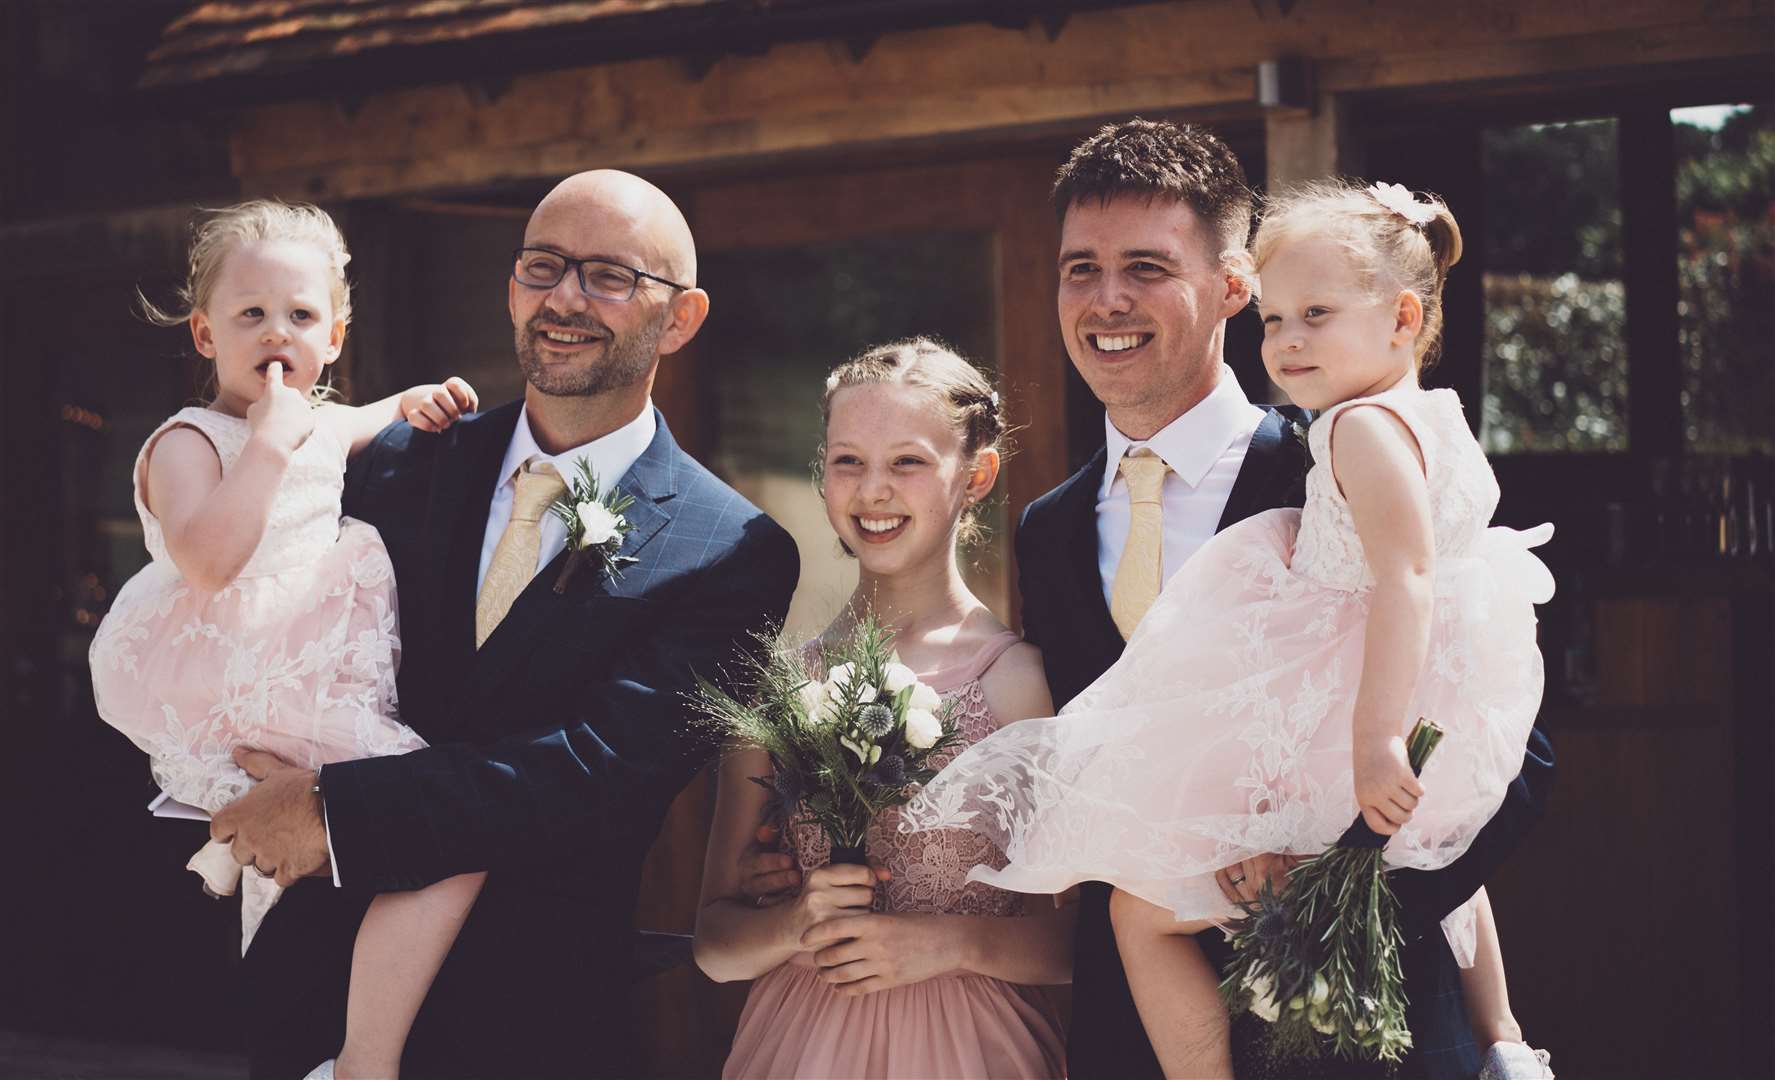 Richard and Mark with their flowergirls Picture:Tom Cullen Photography